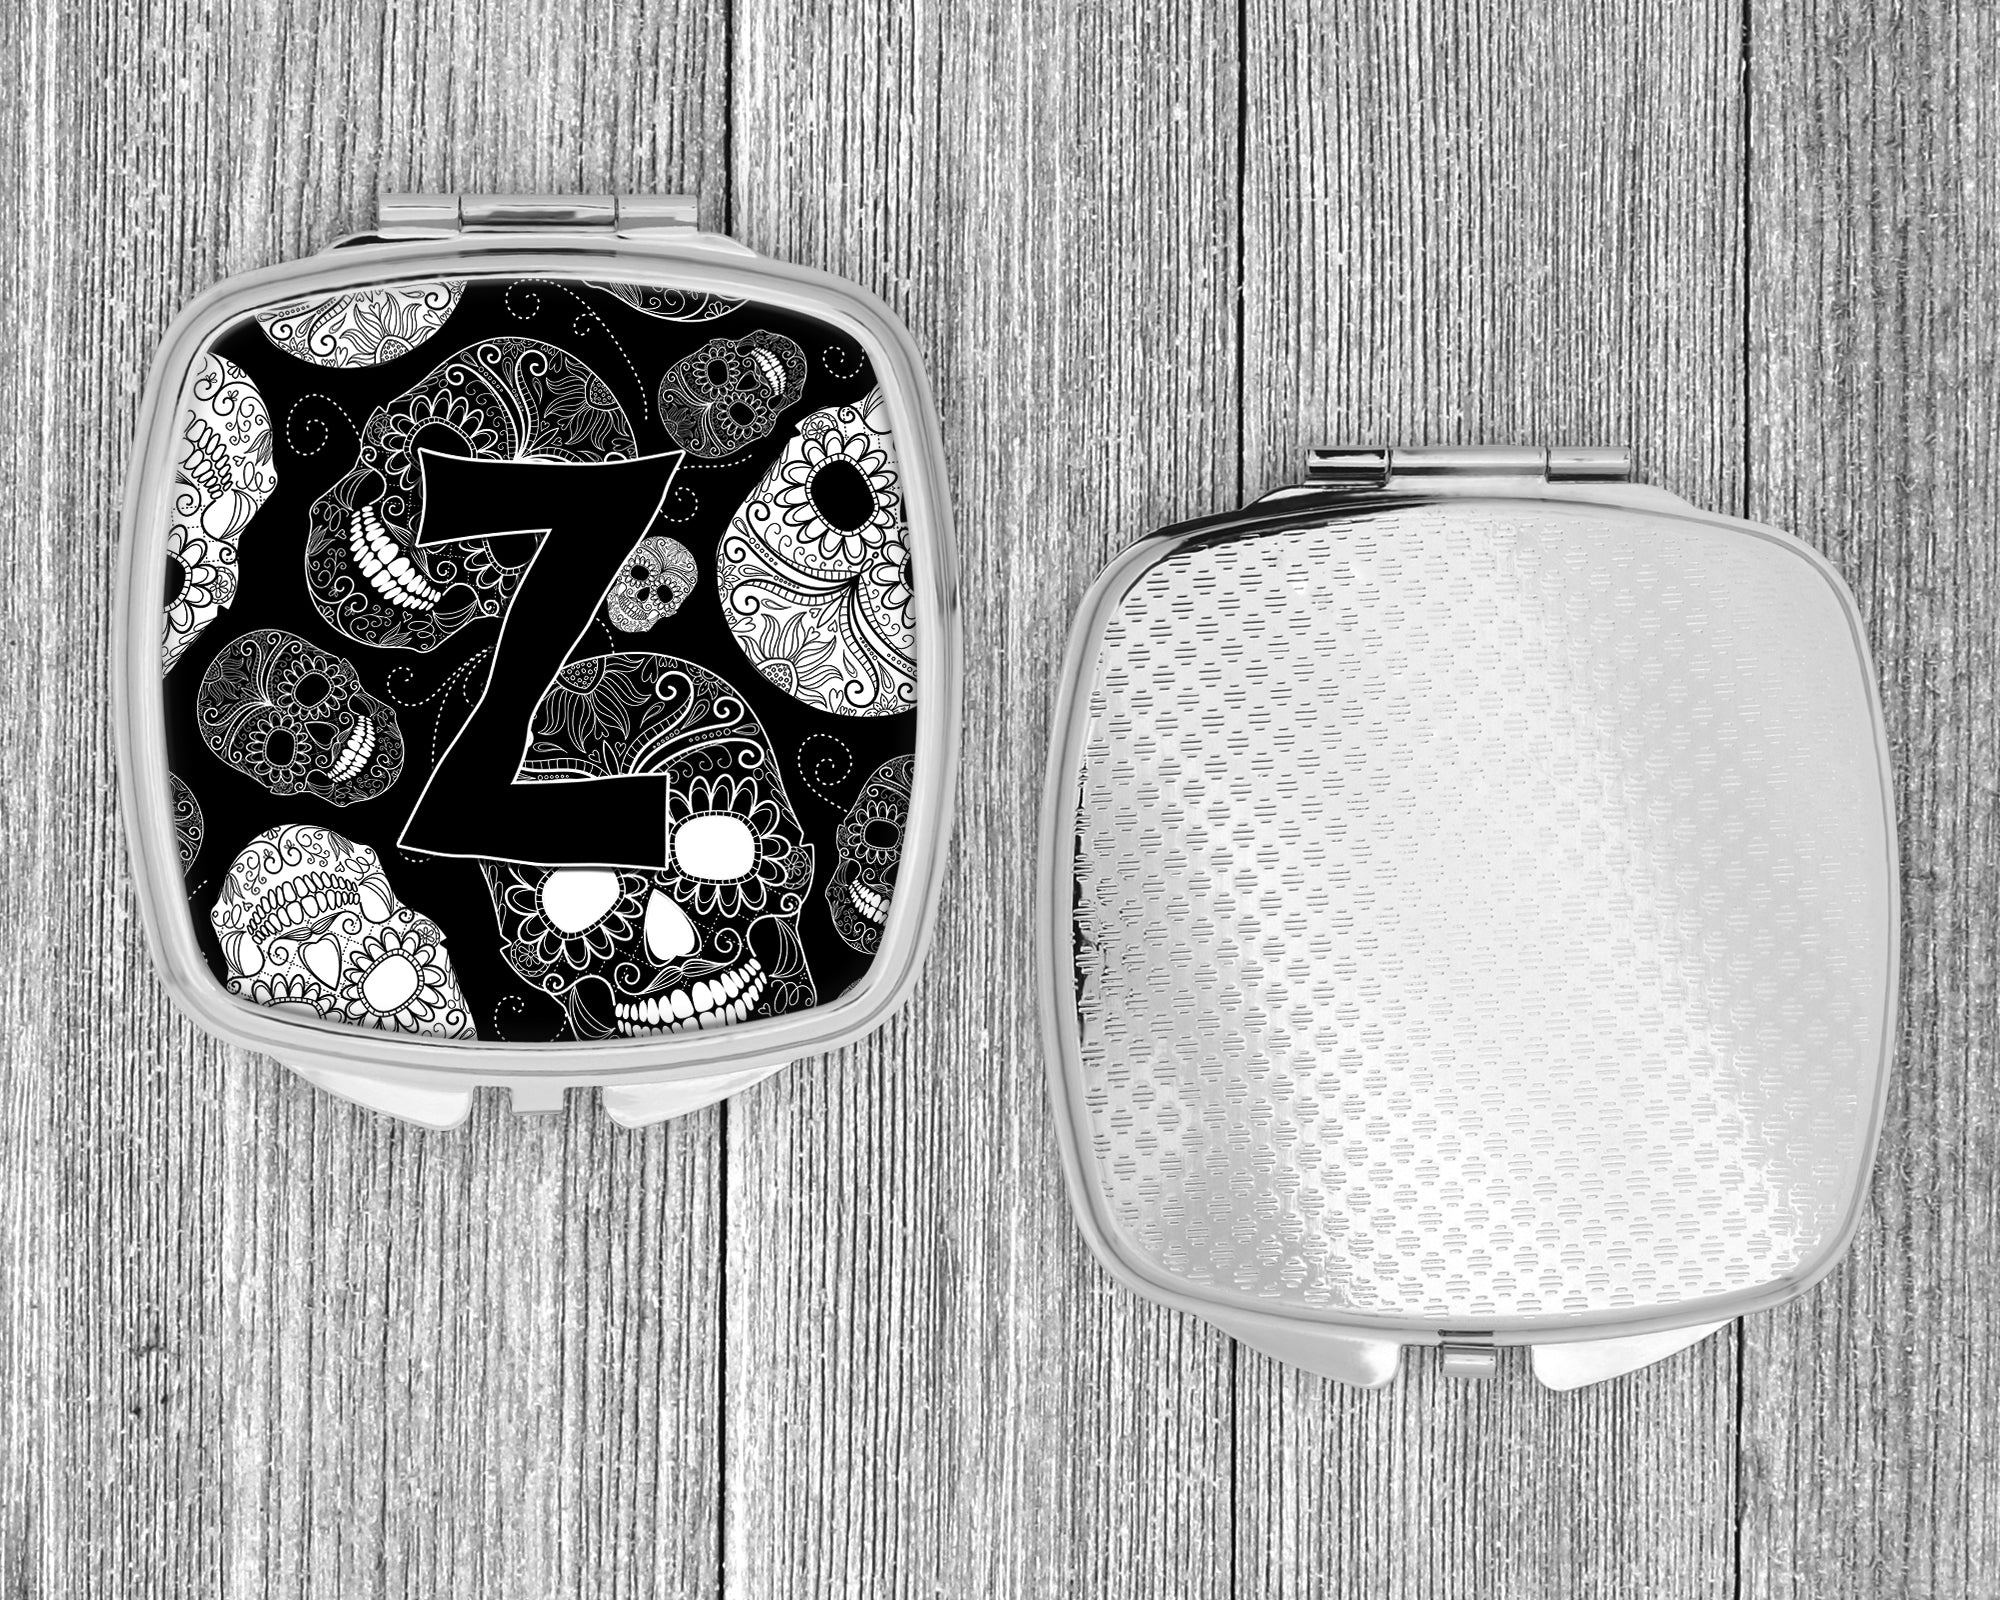 Letter Z Day of the Dead Skulls Black Compact Mirror CJ2008-ZSCM  the-store.com.